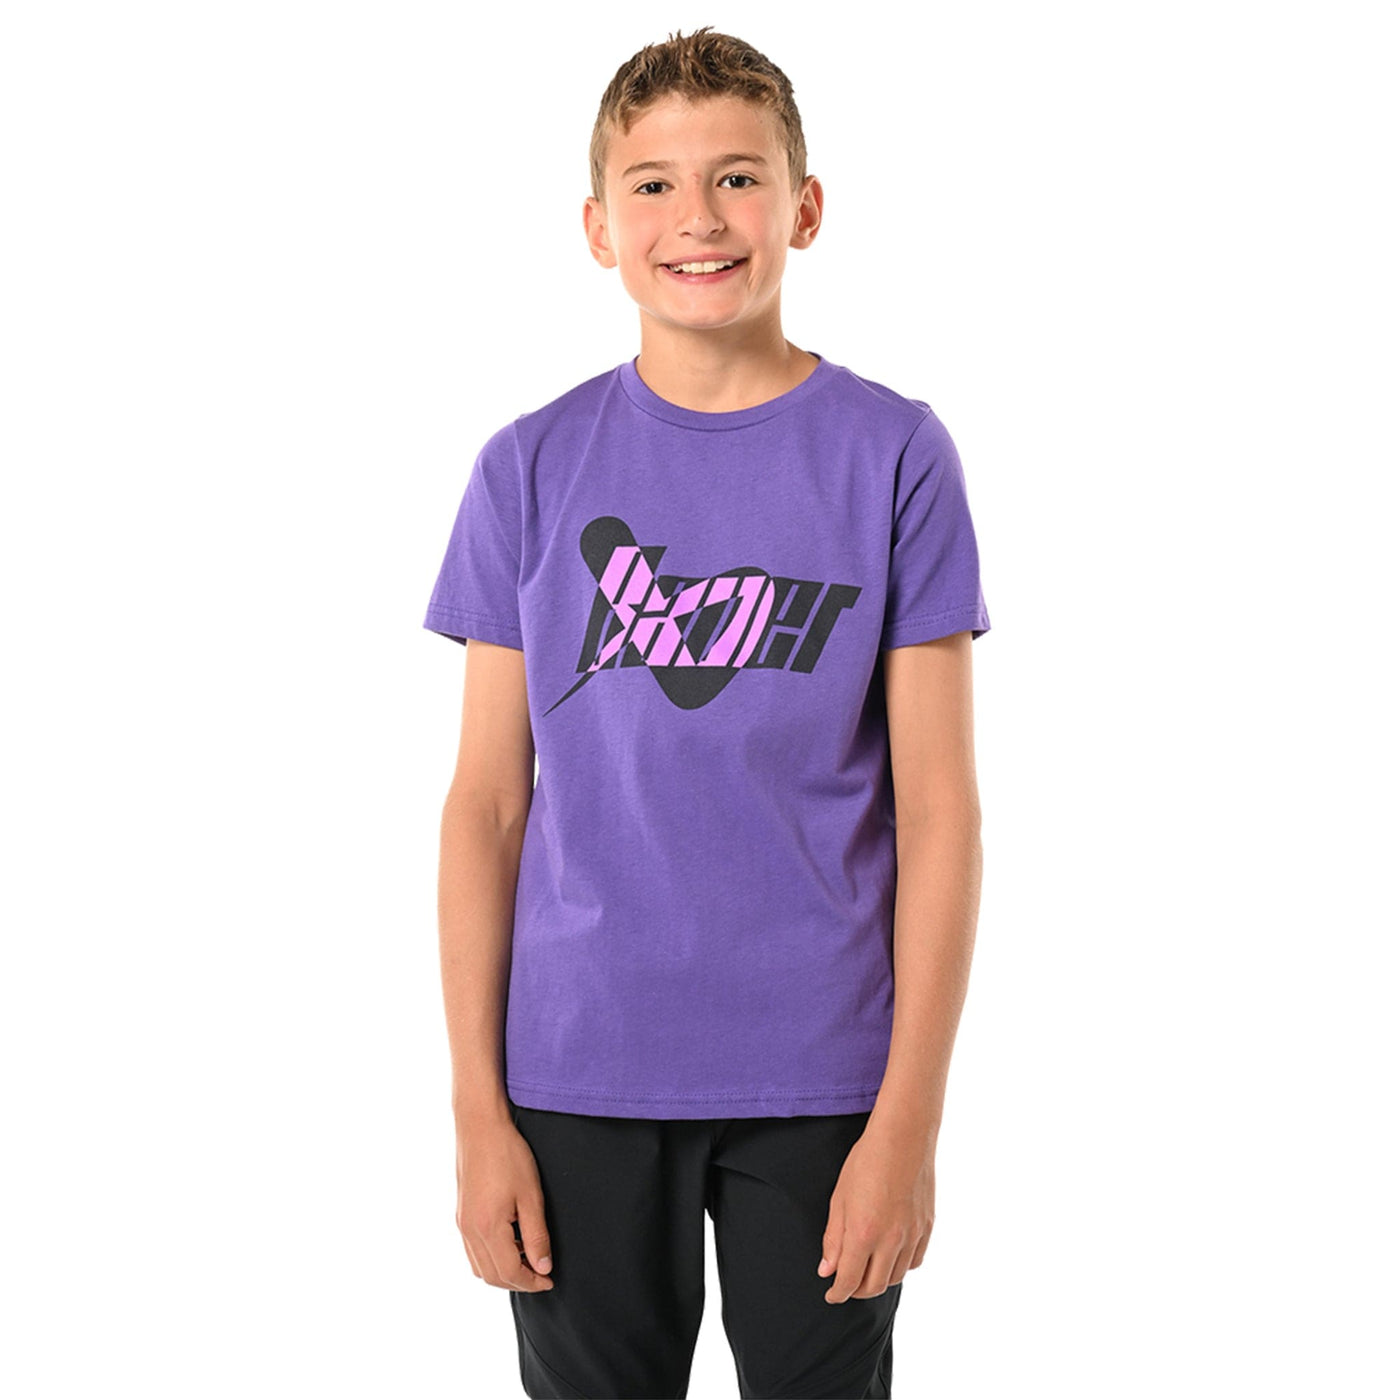 Bauer Icon Mix Shortsleeve Youth Shirt - Purple - The Hockey Shop Source For Sports